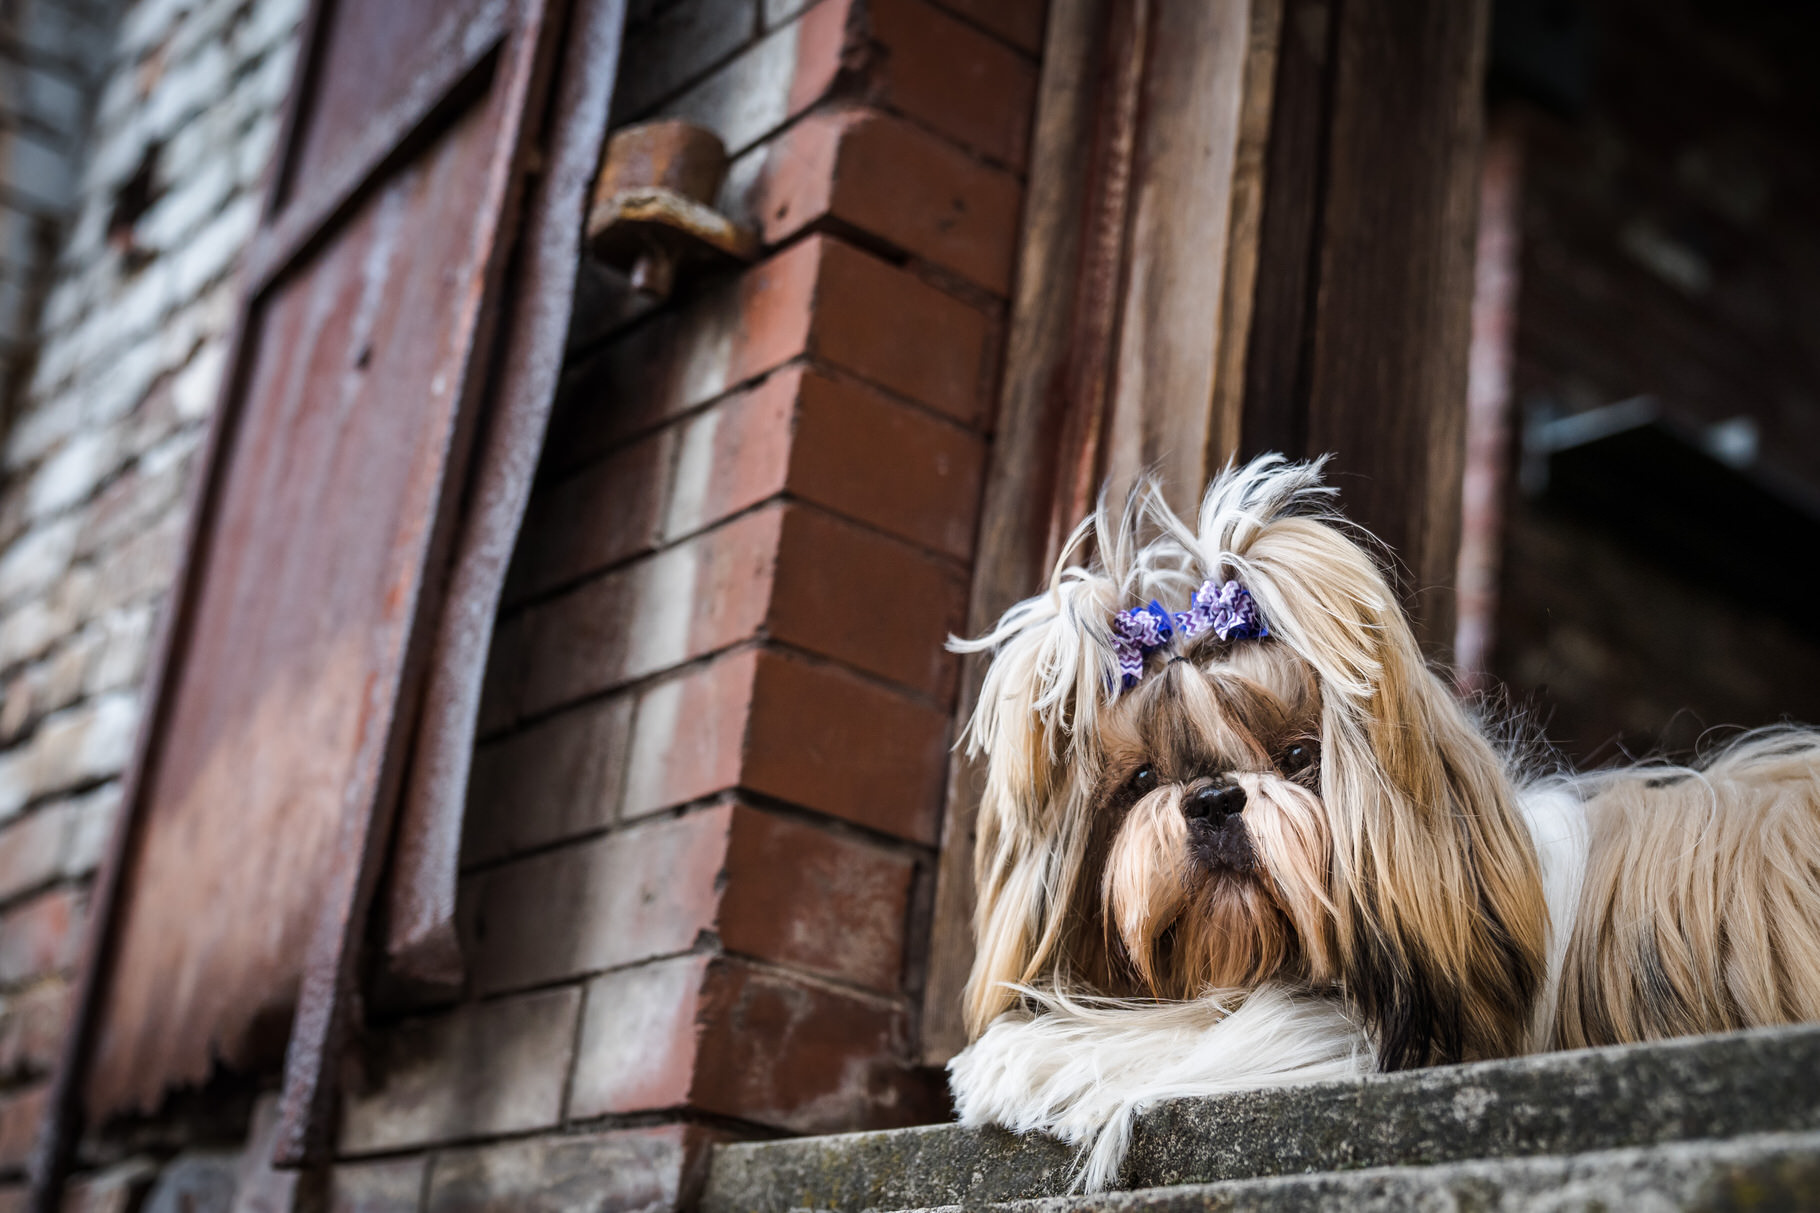 Shih tzu dog in the Pearl District of Portland, OR